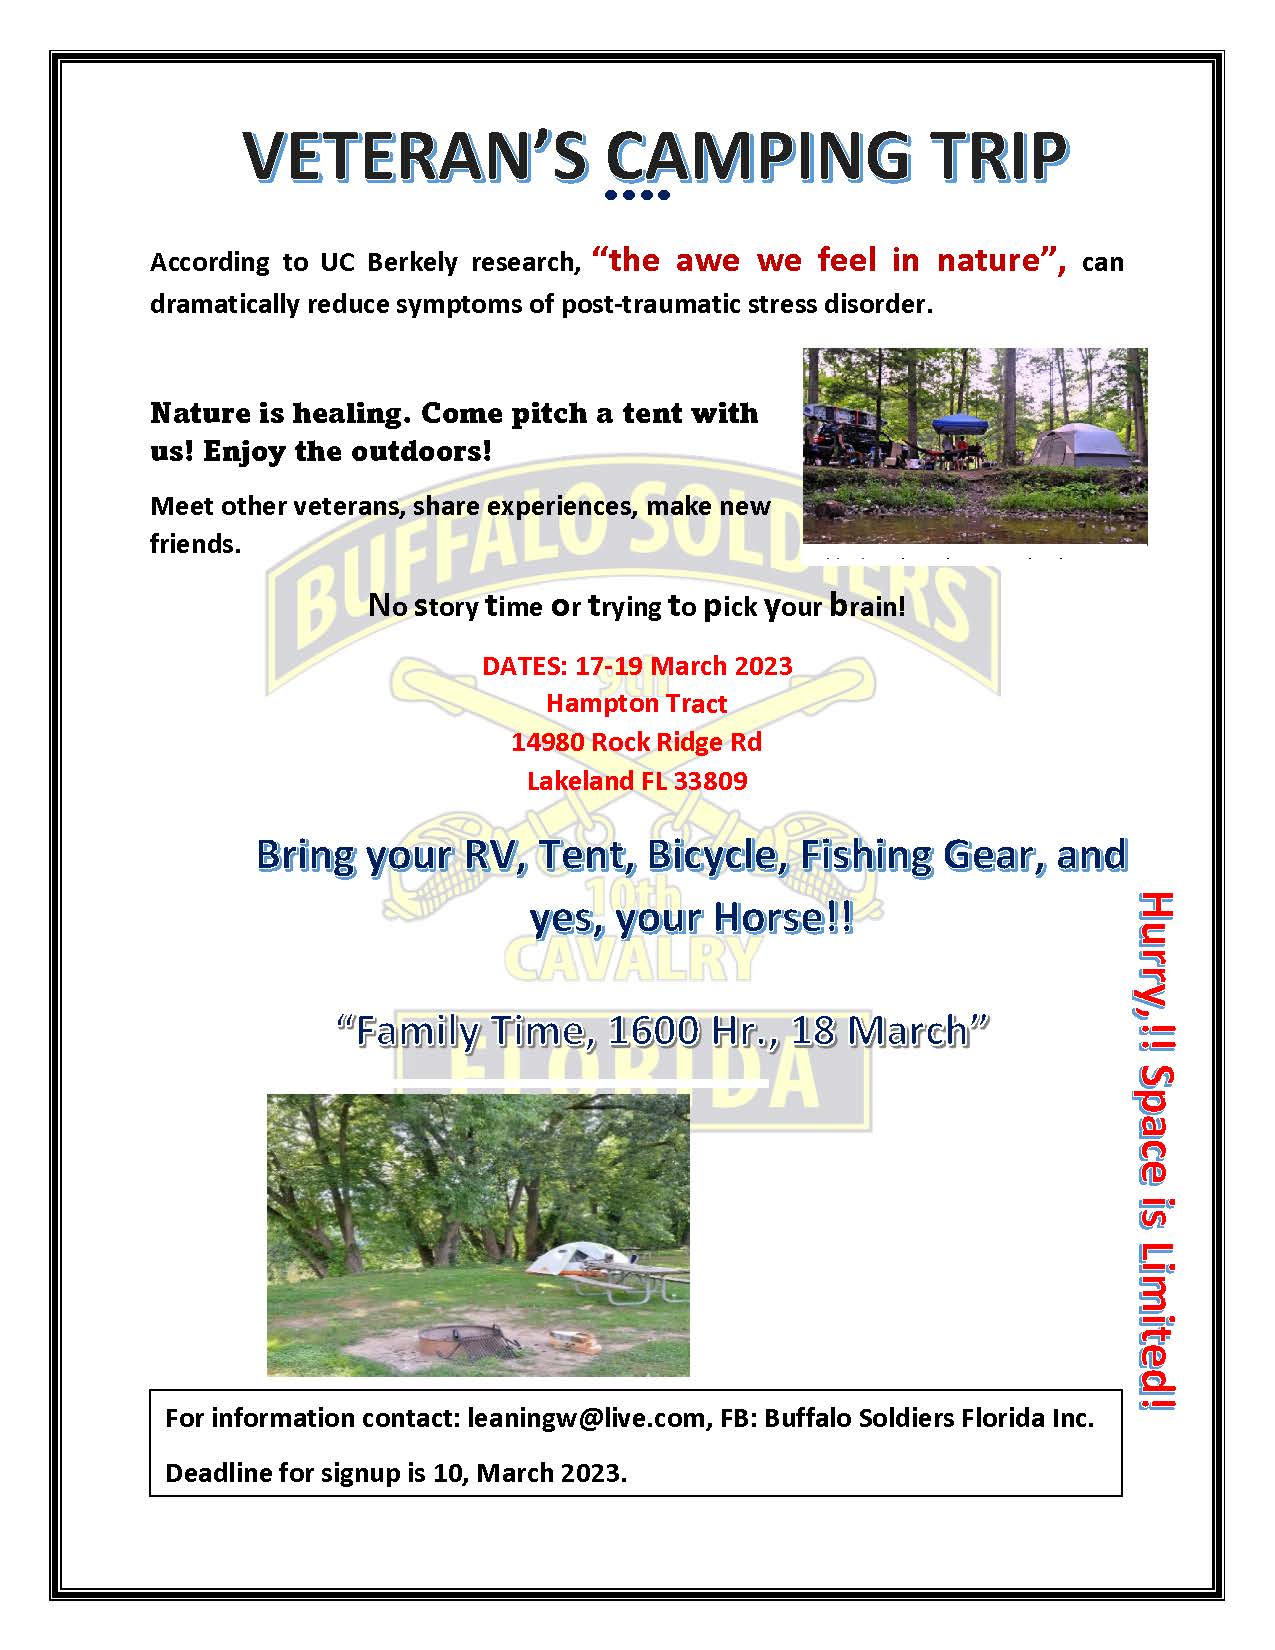 Nature is healing. Come pitch a tent with us! Contact leaningw@live.com for more information or on FB:  Buffalo Soldiers Florida Inc.  Deadline to sign up is  3-10-23.  Space is limited.